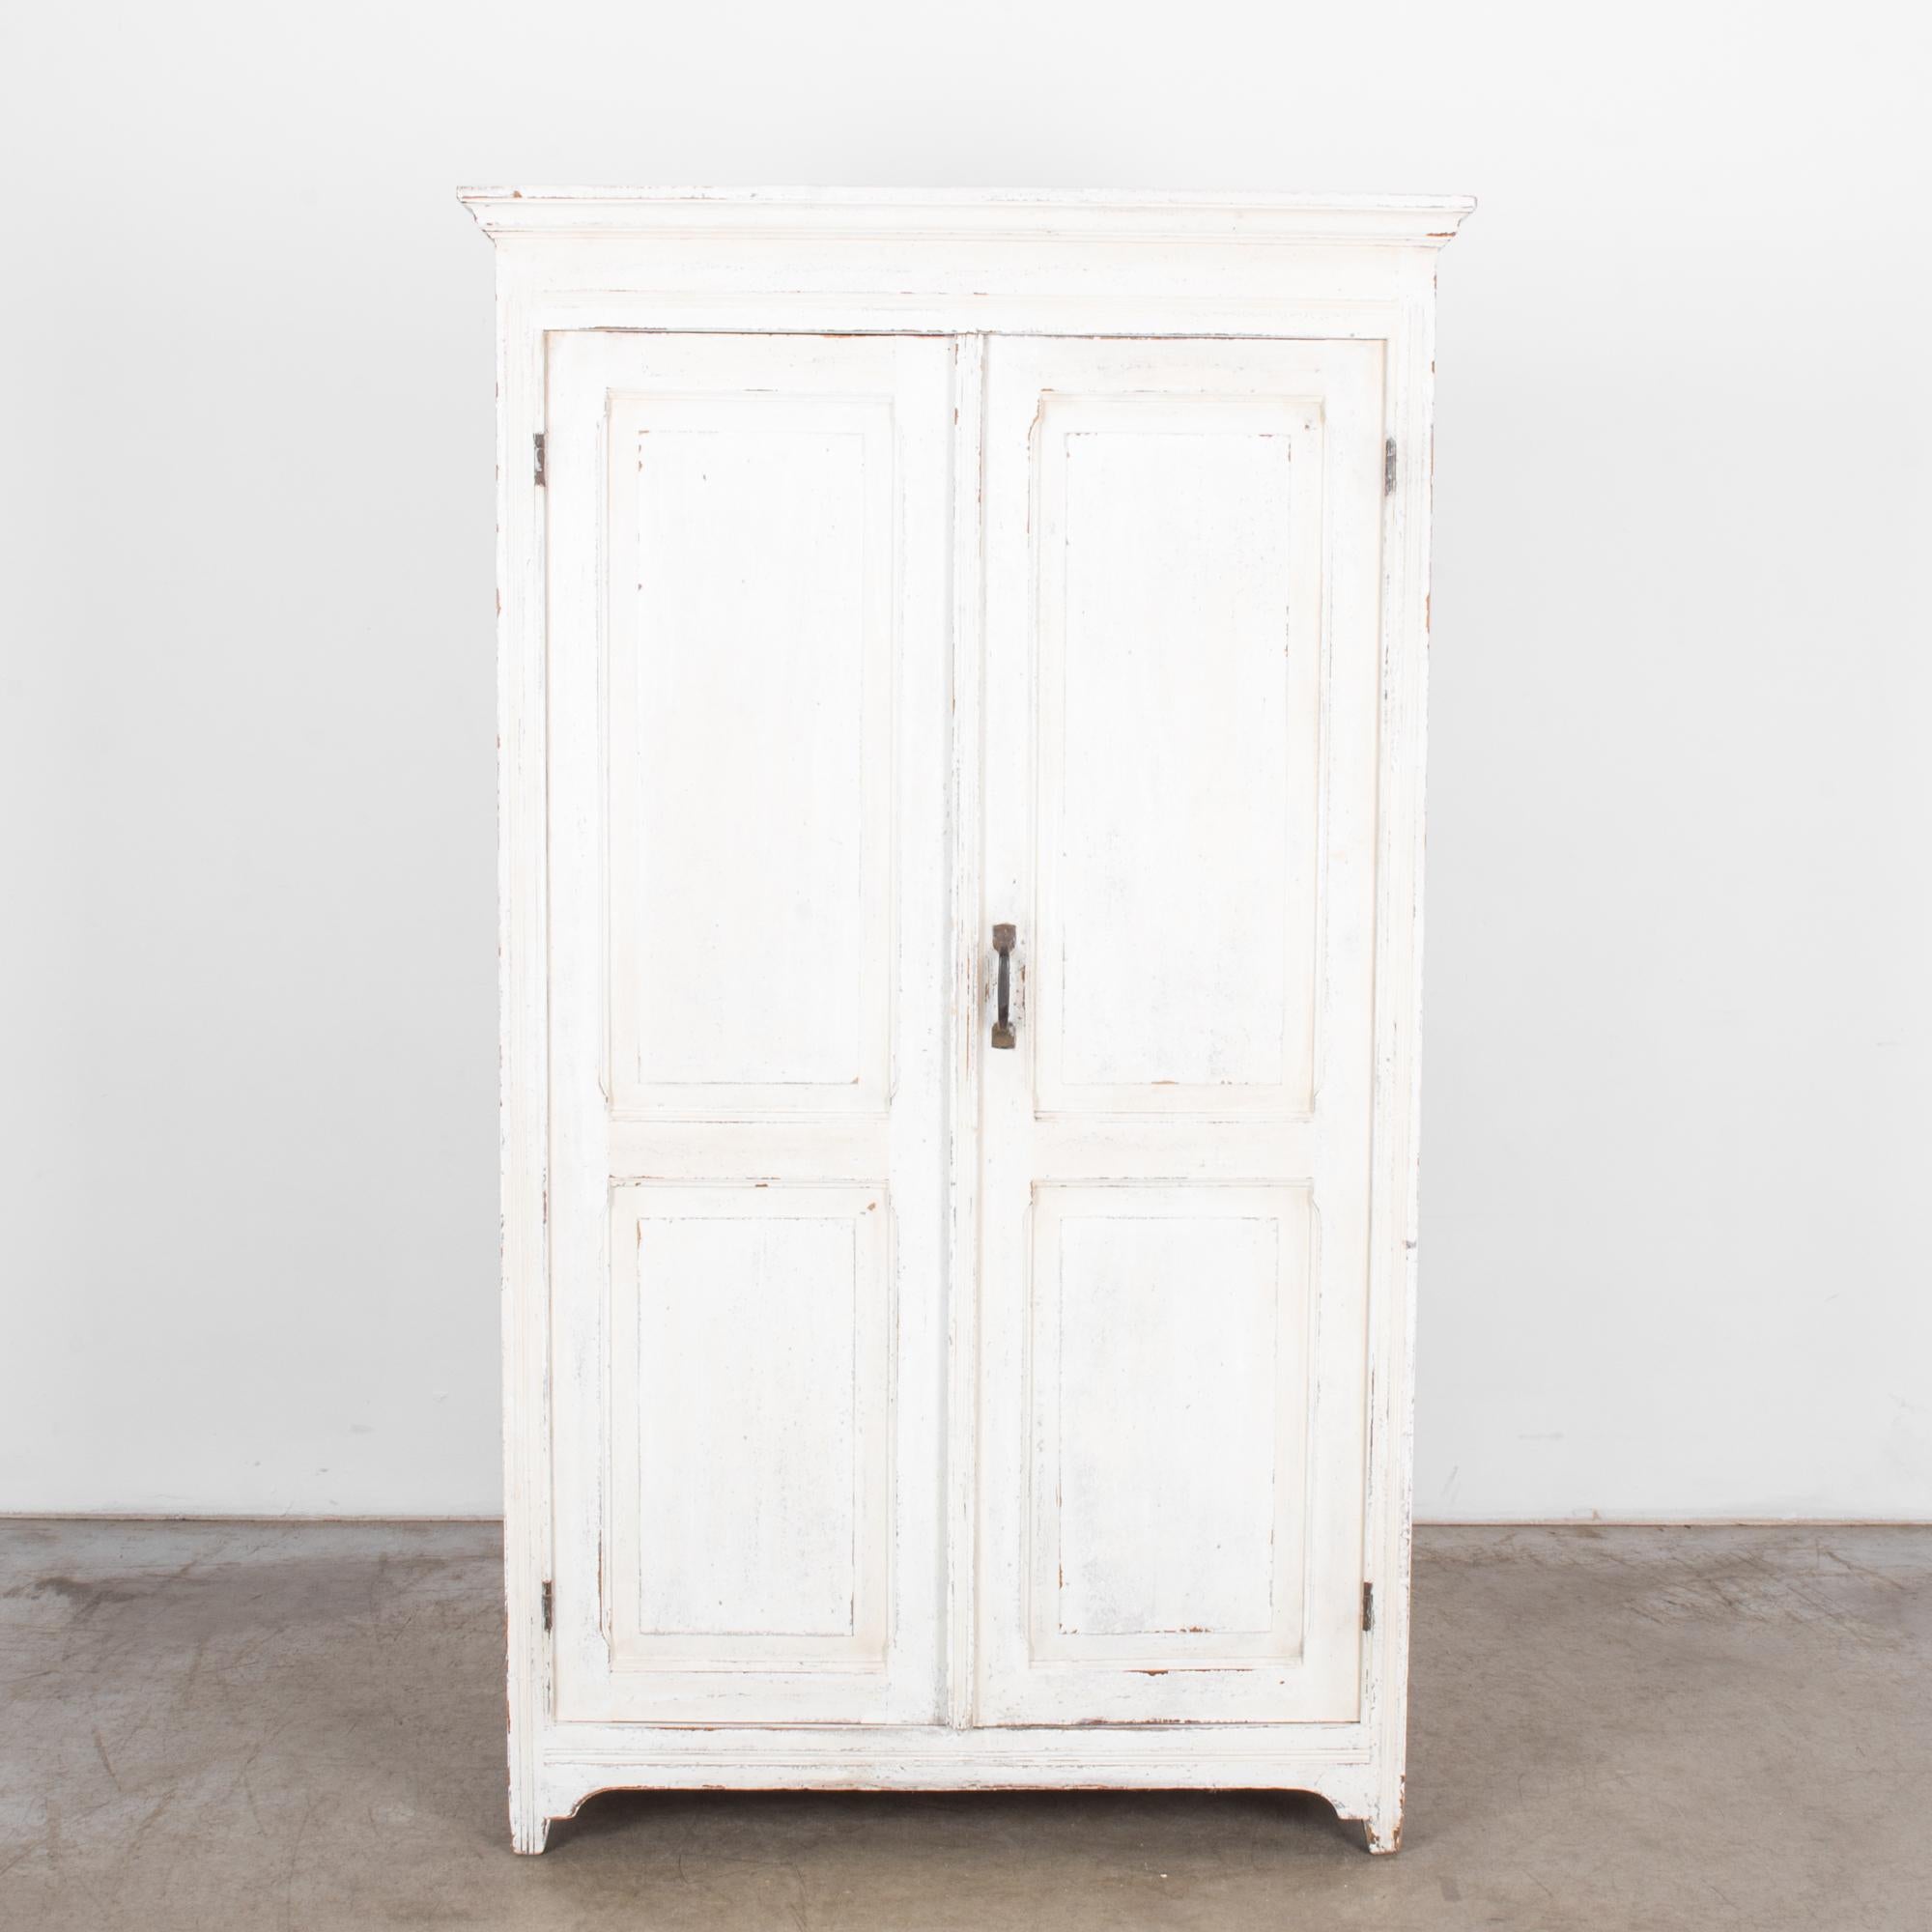 An antique white wood patinated armoire from Belgium, circa 1900. Features wide double doors with recessed panels and curved brass handle, and a bifurcated interior with four shelves. White wash brings brightness and light to any affiliated interior.